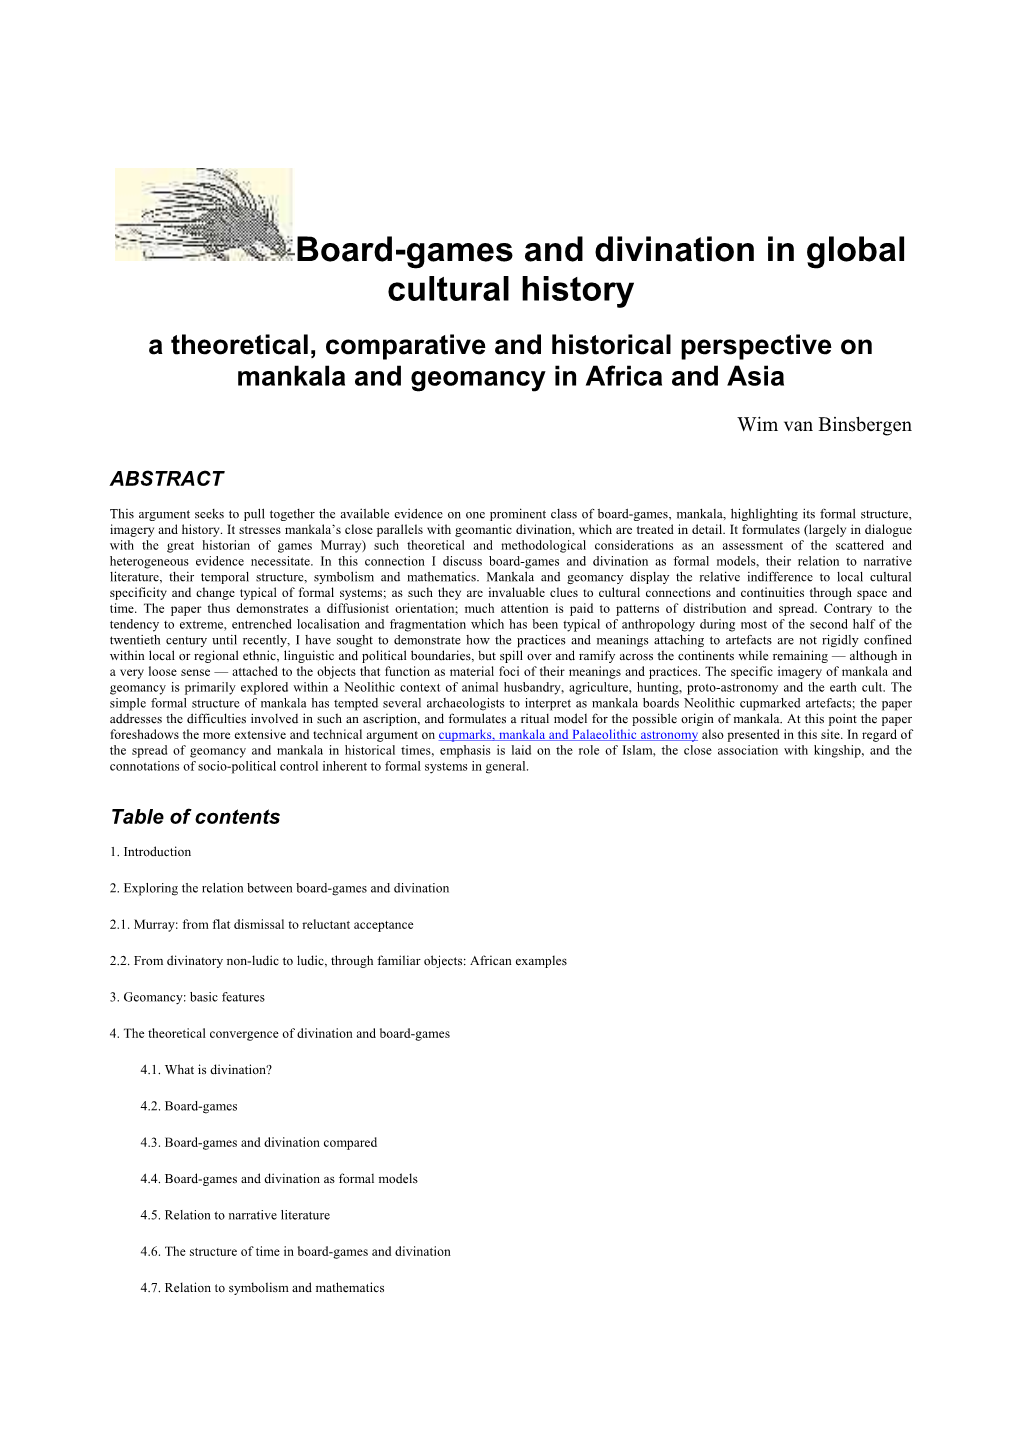 Board-Games and Divination in Global Cultural History a Theoretical, Comparative and Historical Perspective on Mankala and Geomancy in Africa and Asia